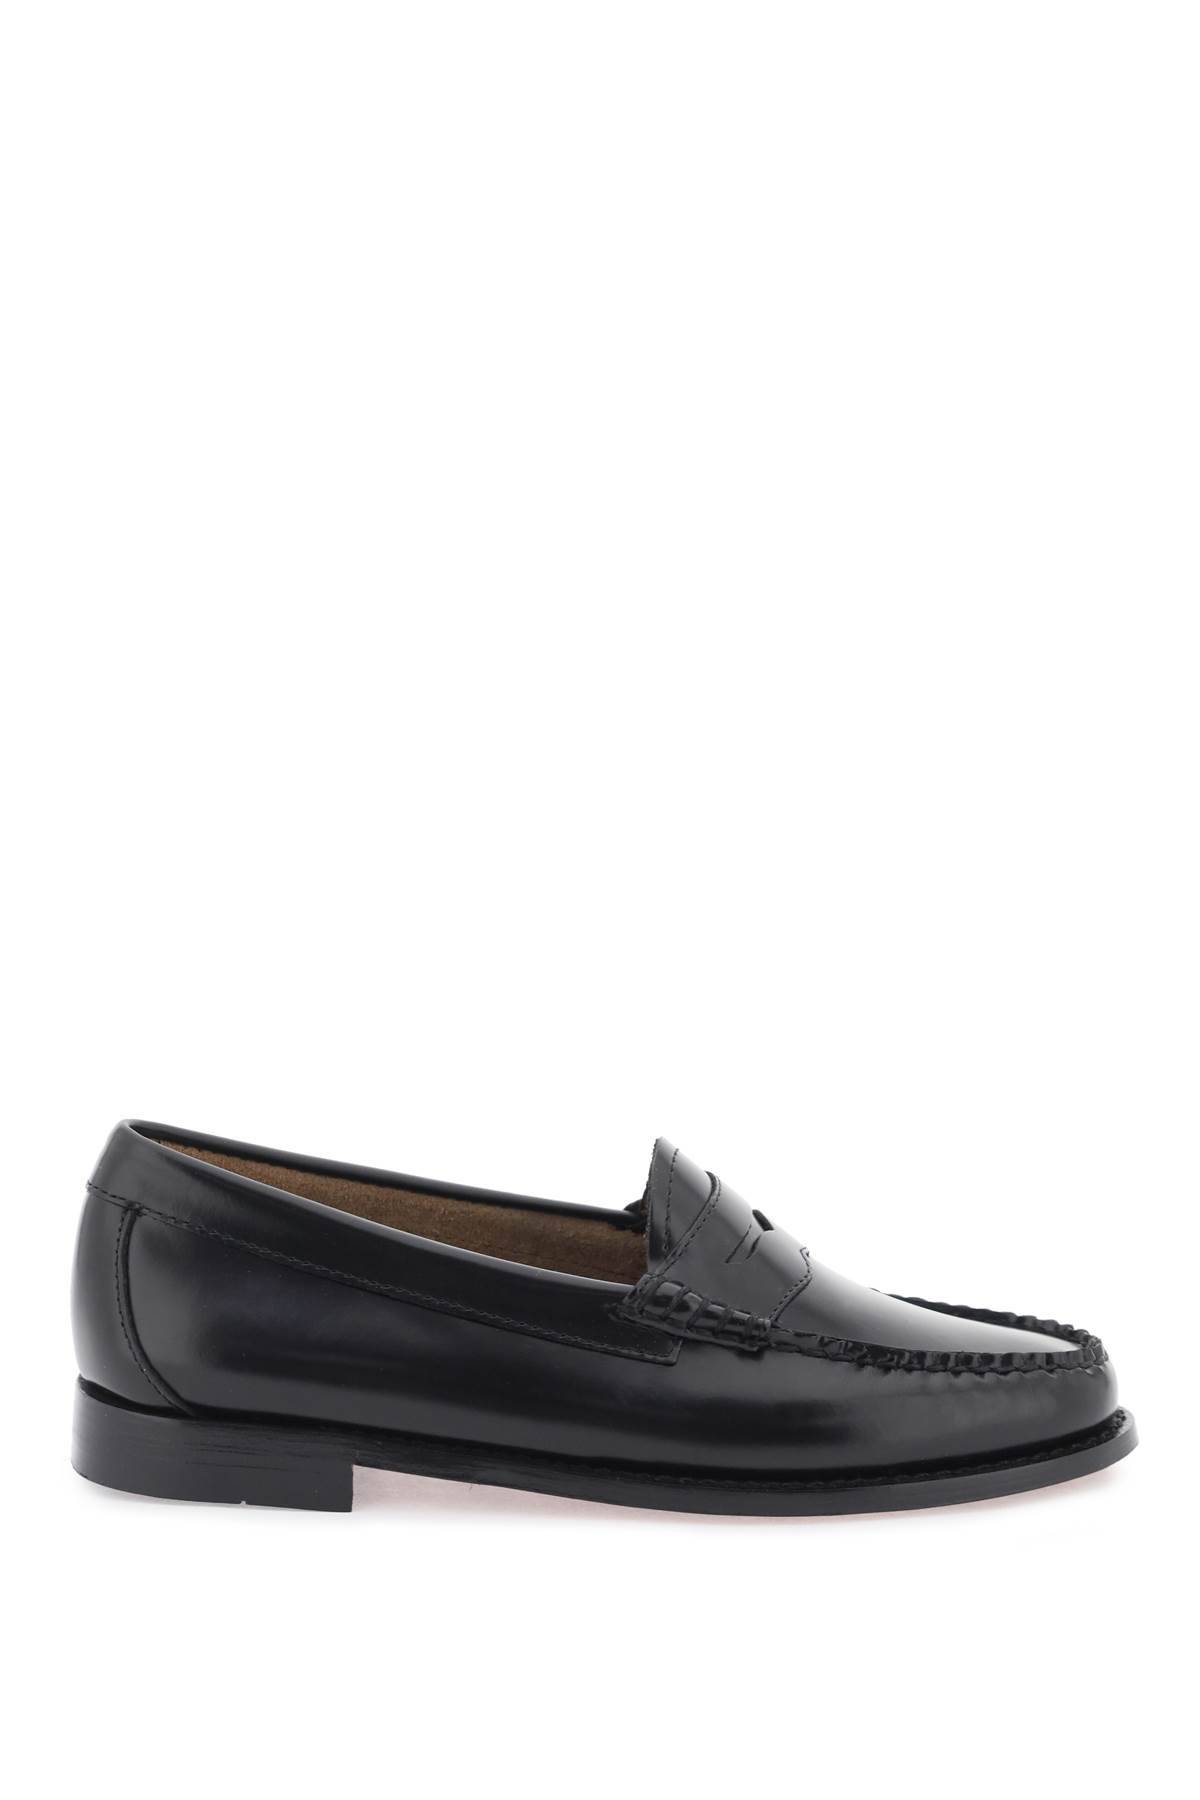 G.H. BASS G. H. BASS weejuns penny loafers